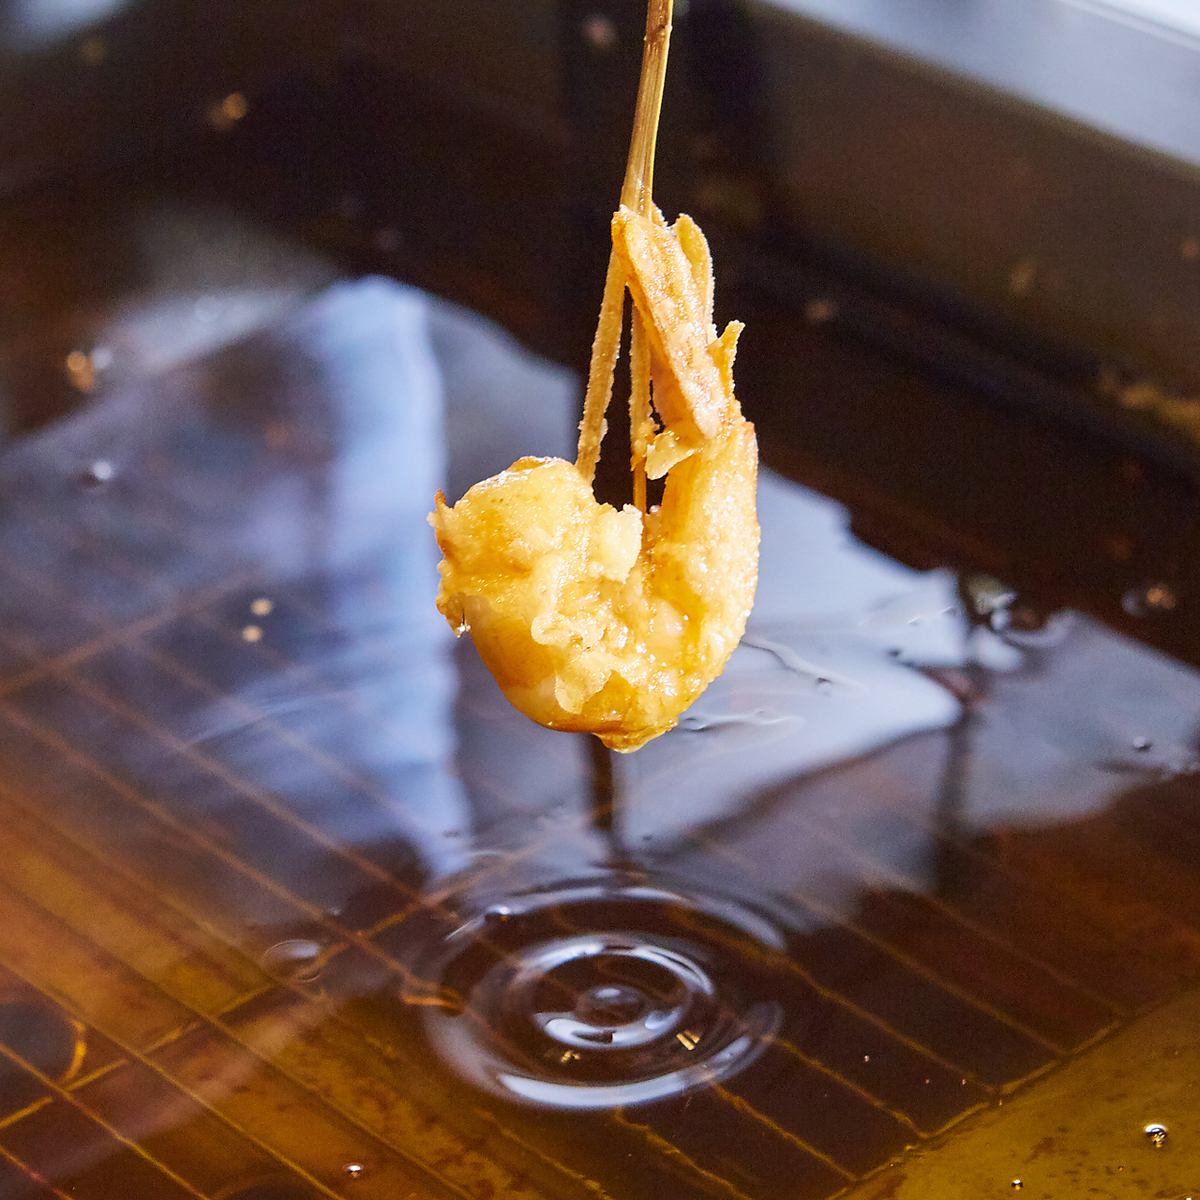 We are proud of our crispy Niigata ingredients and oils.